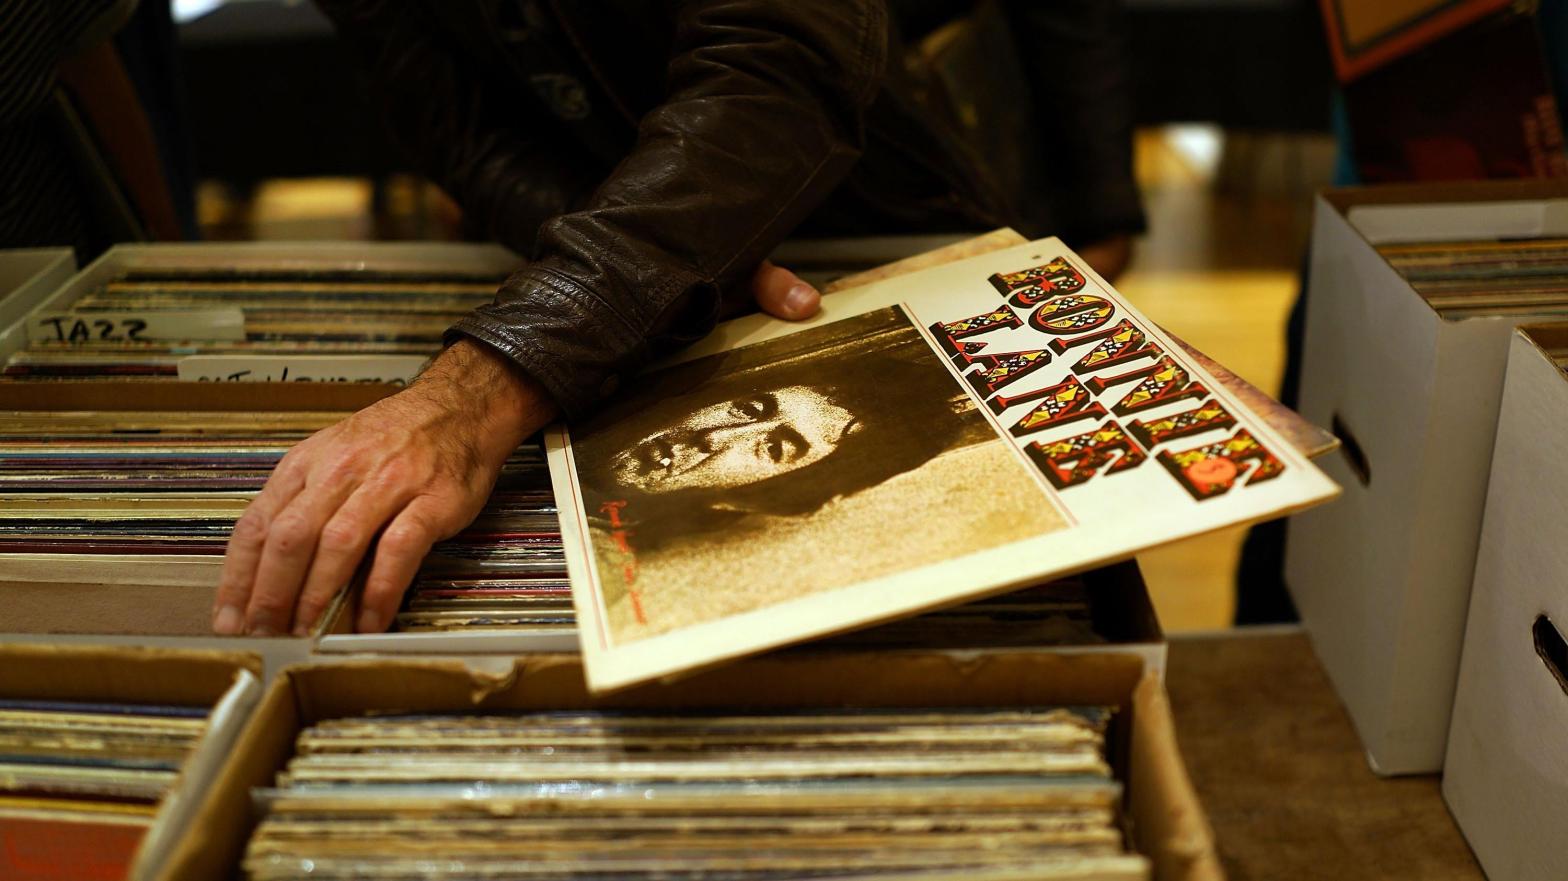 The allure of the vinyl record may have made a comeback during the height of the covid-19 pandemic, when live music was shut down. (Image: Spencer Platt, Getty Images)